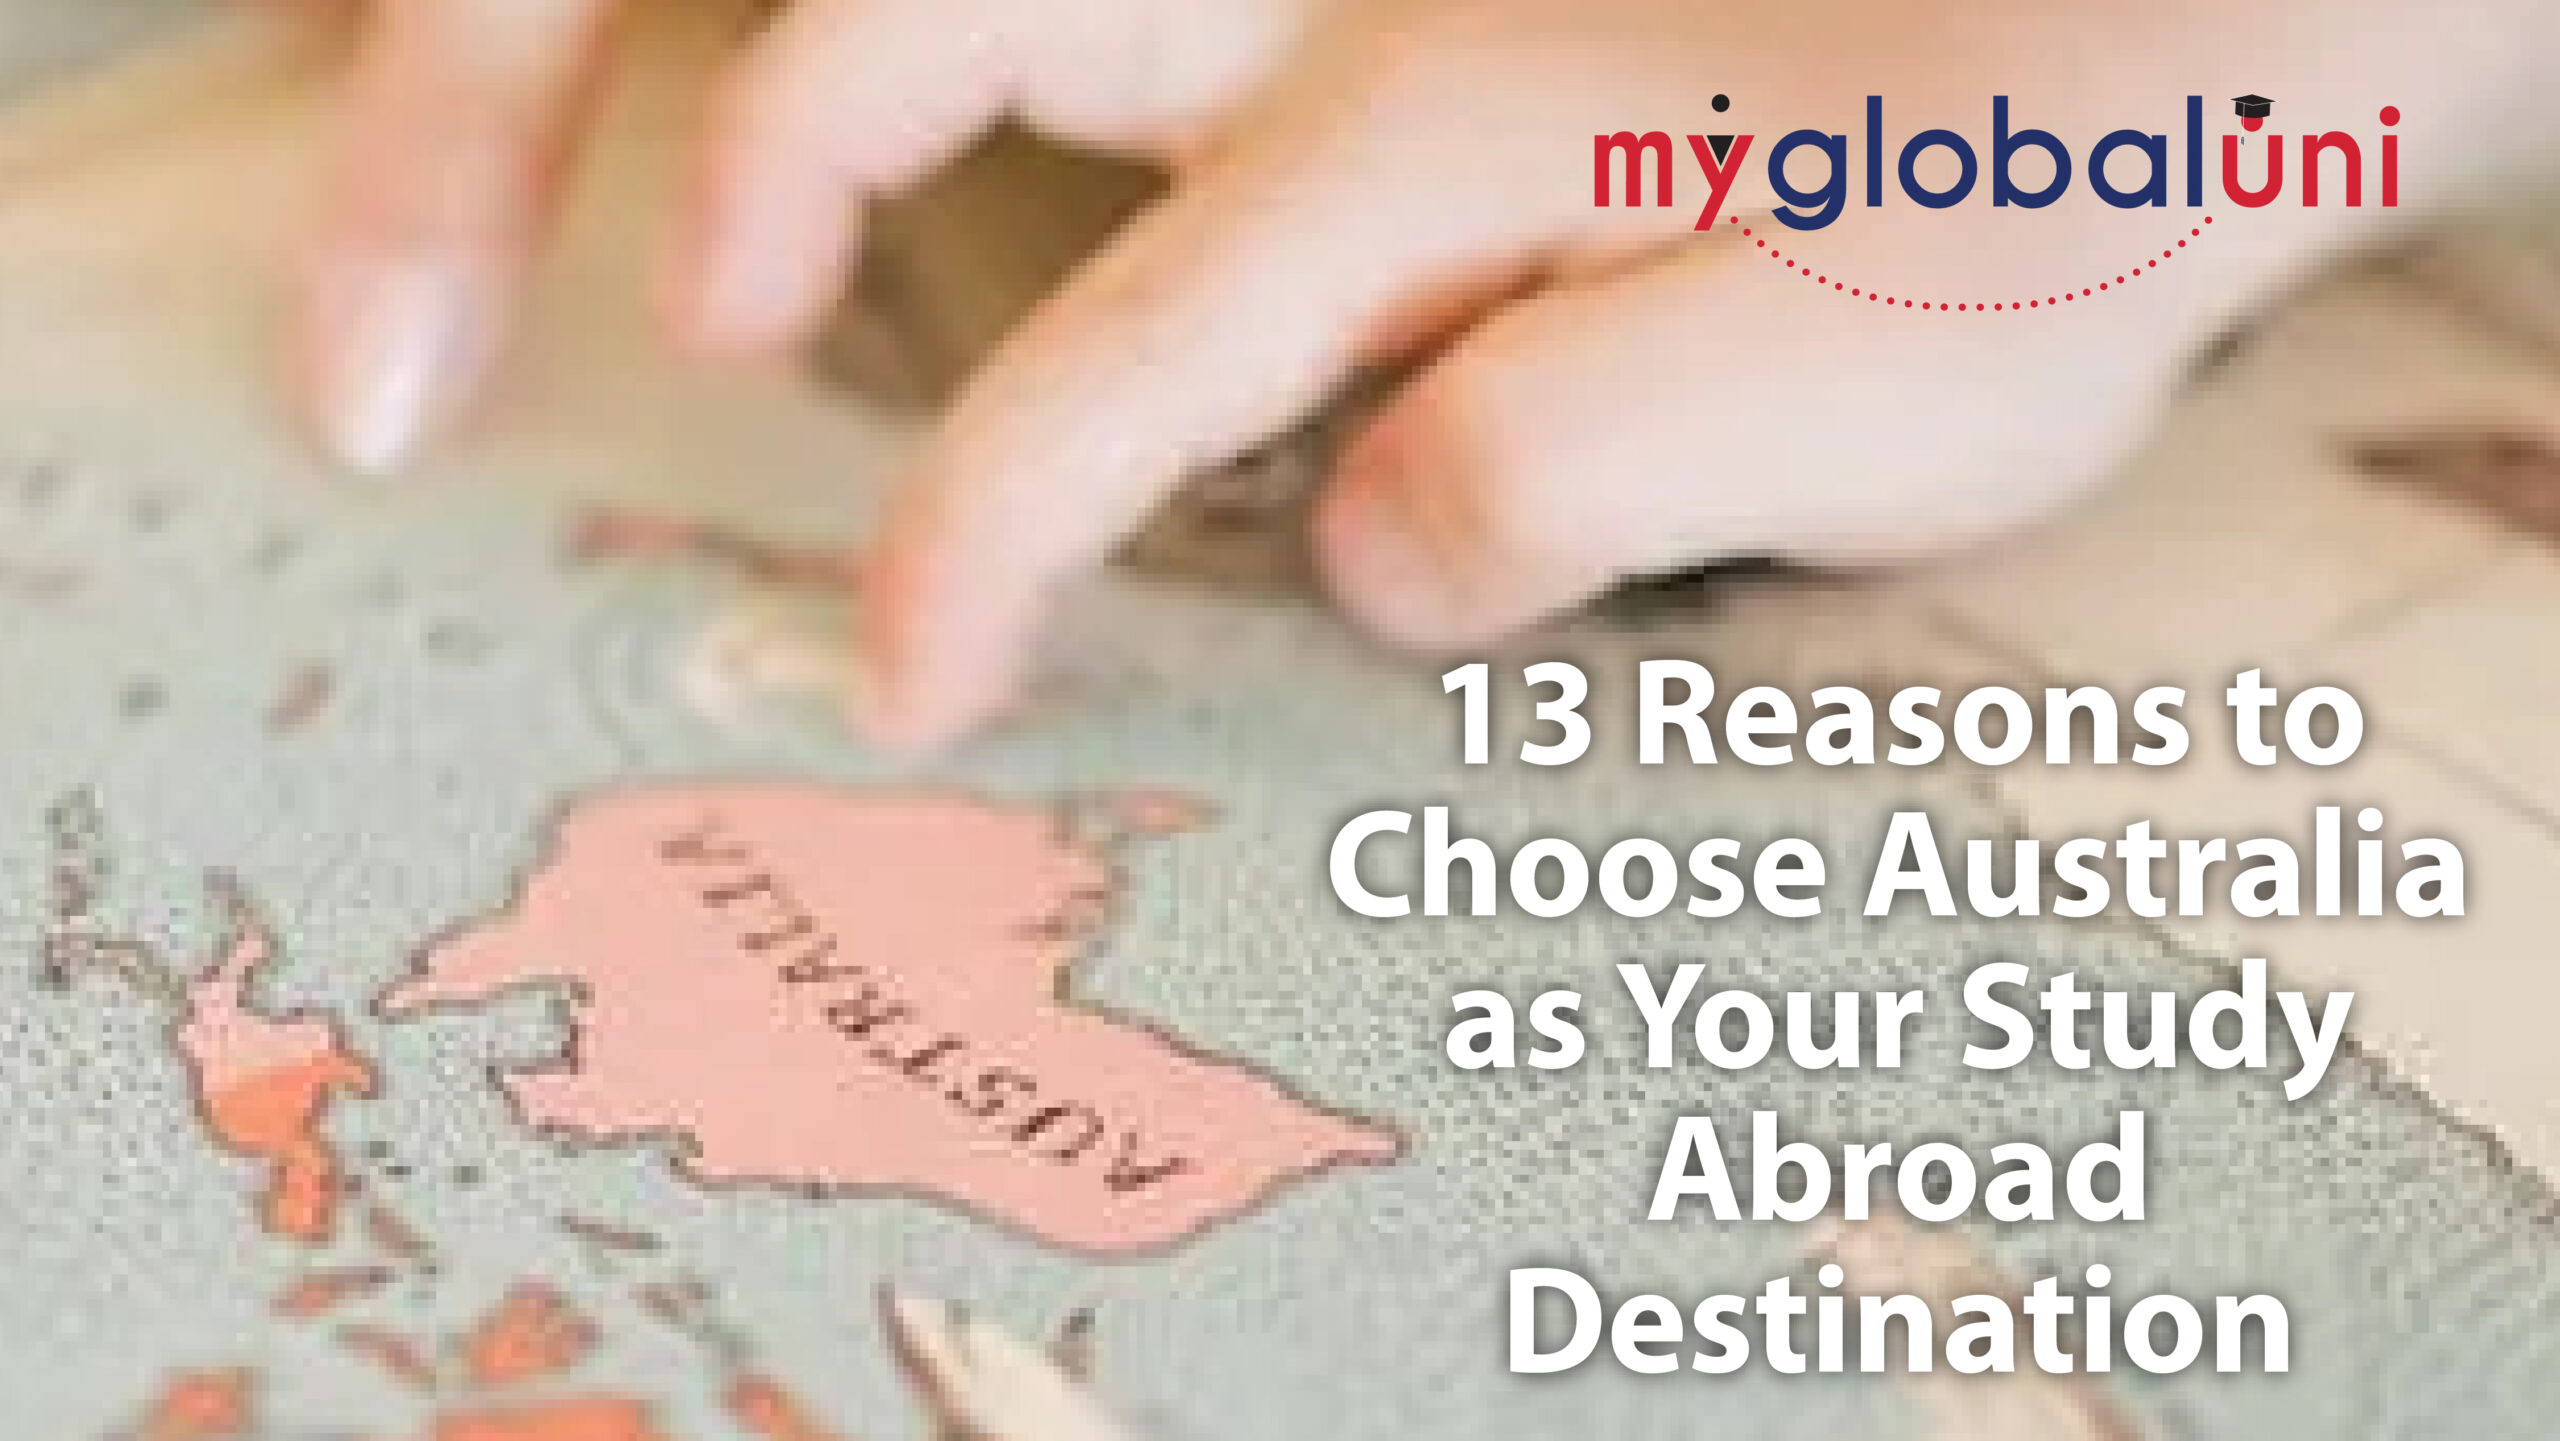 The 13 Reasons to Choose Australia as Your Study Abroad Destination from myglobaluni